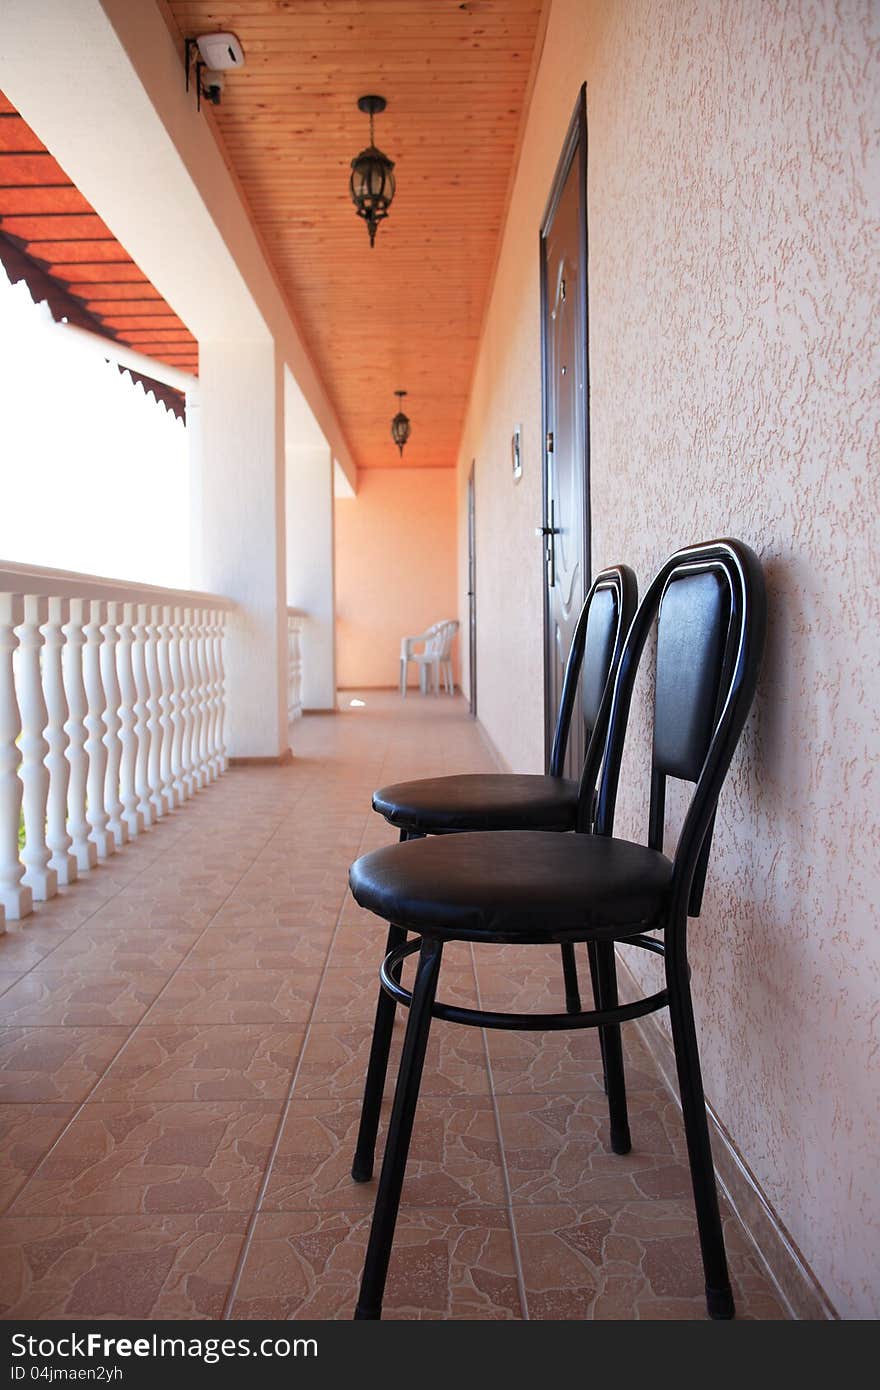 Pair of chairs standing on long terrace with white railing. Pair of chairs standing on long terrace with white railing